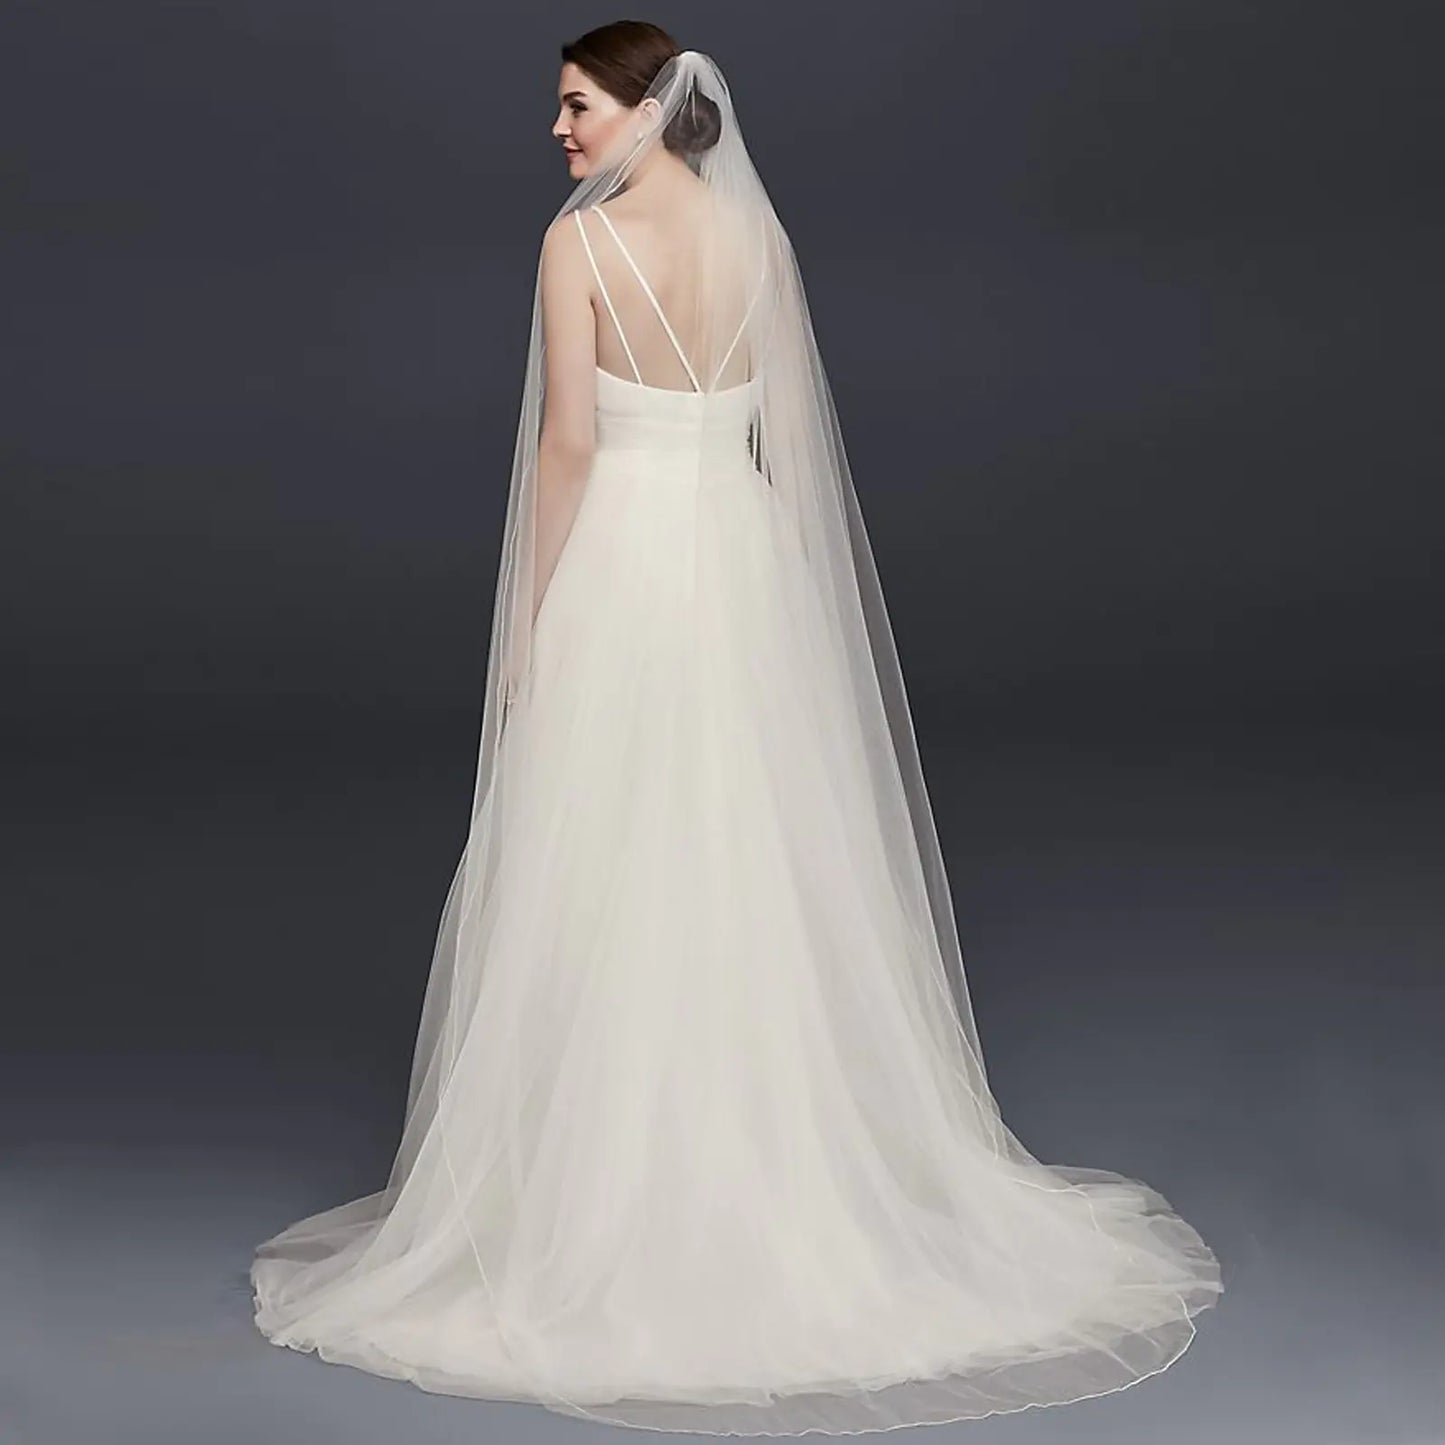 Wedding Veil Long with Comb Soft Single